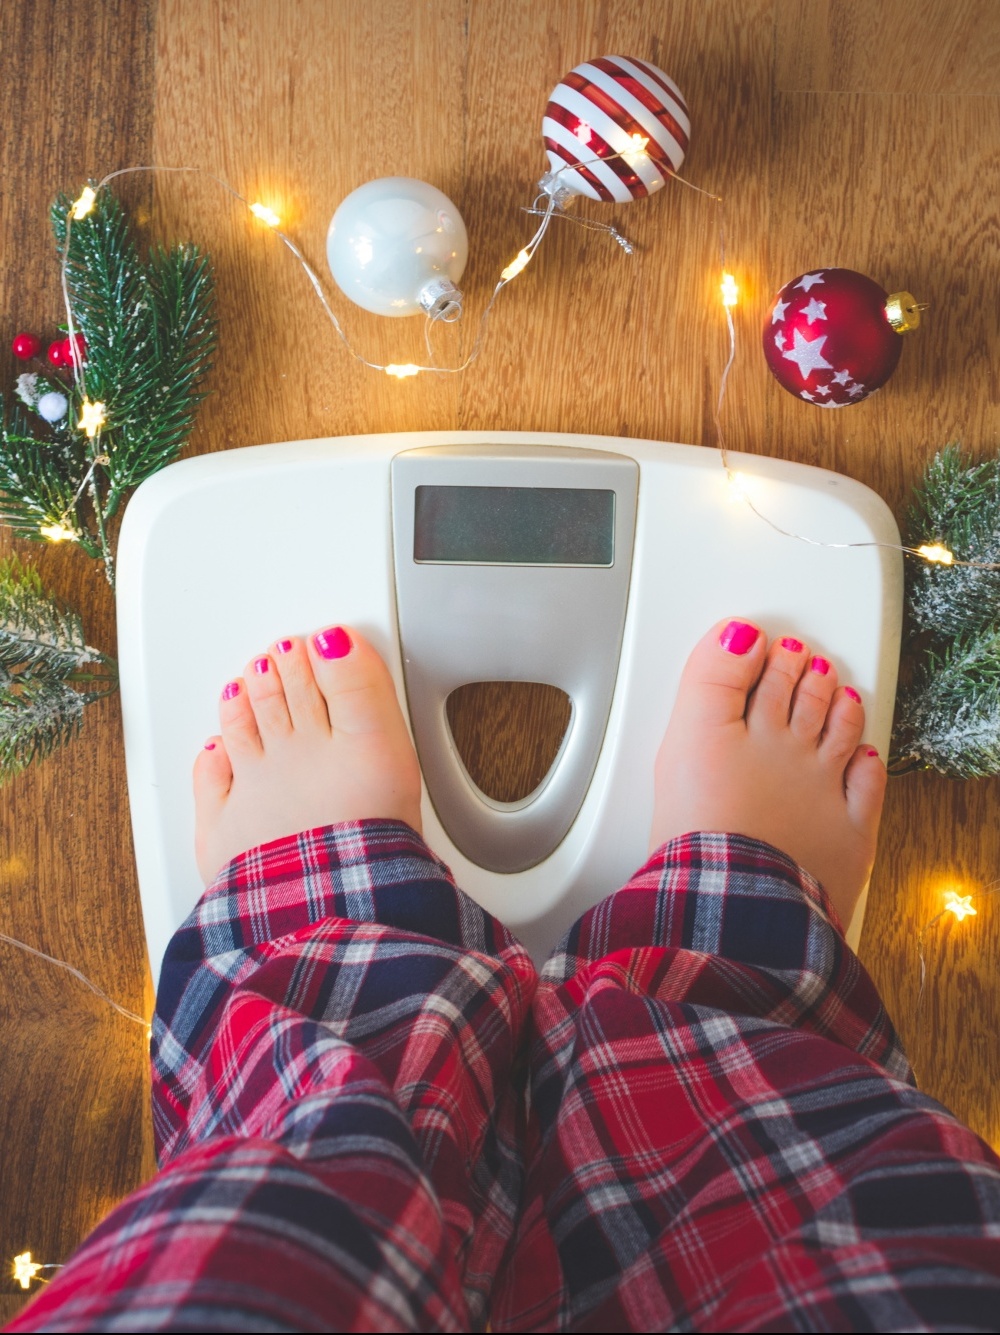 Woman's legs in plaid pj pants standing on bathroom scale surrounded by Christmas ornaments